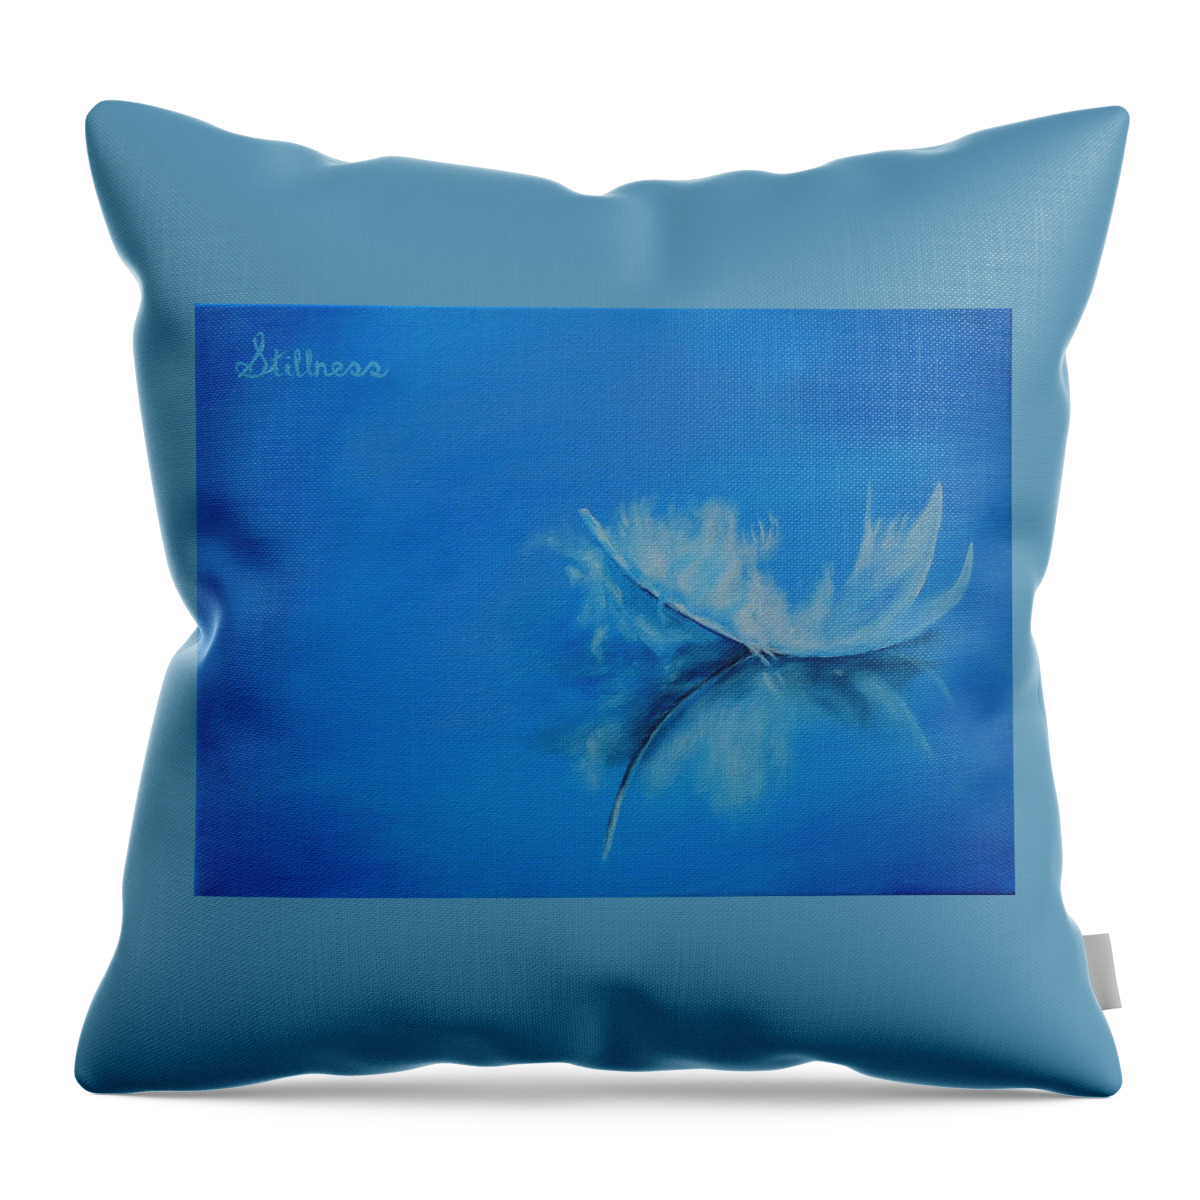 Impressionist Throw Pillow featuring the painting Feather Floating - Stillness by Shirley Wellstead